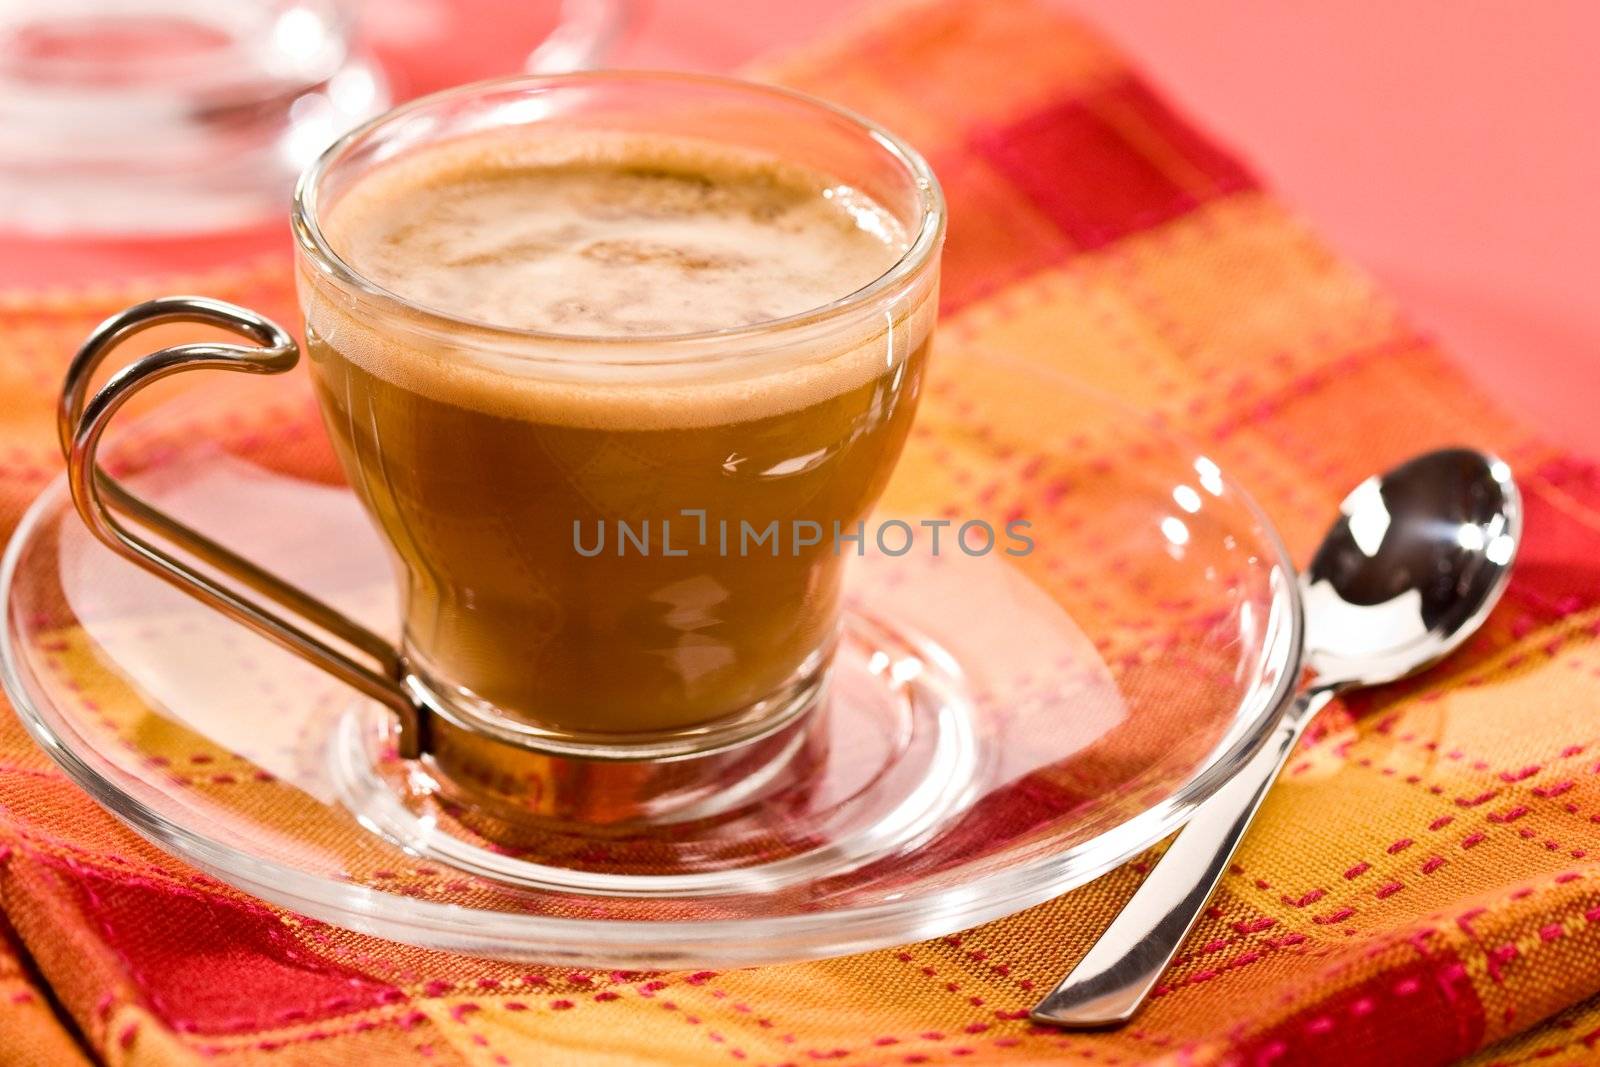 macro picture, cup of coffe, cappuccino